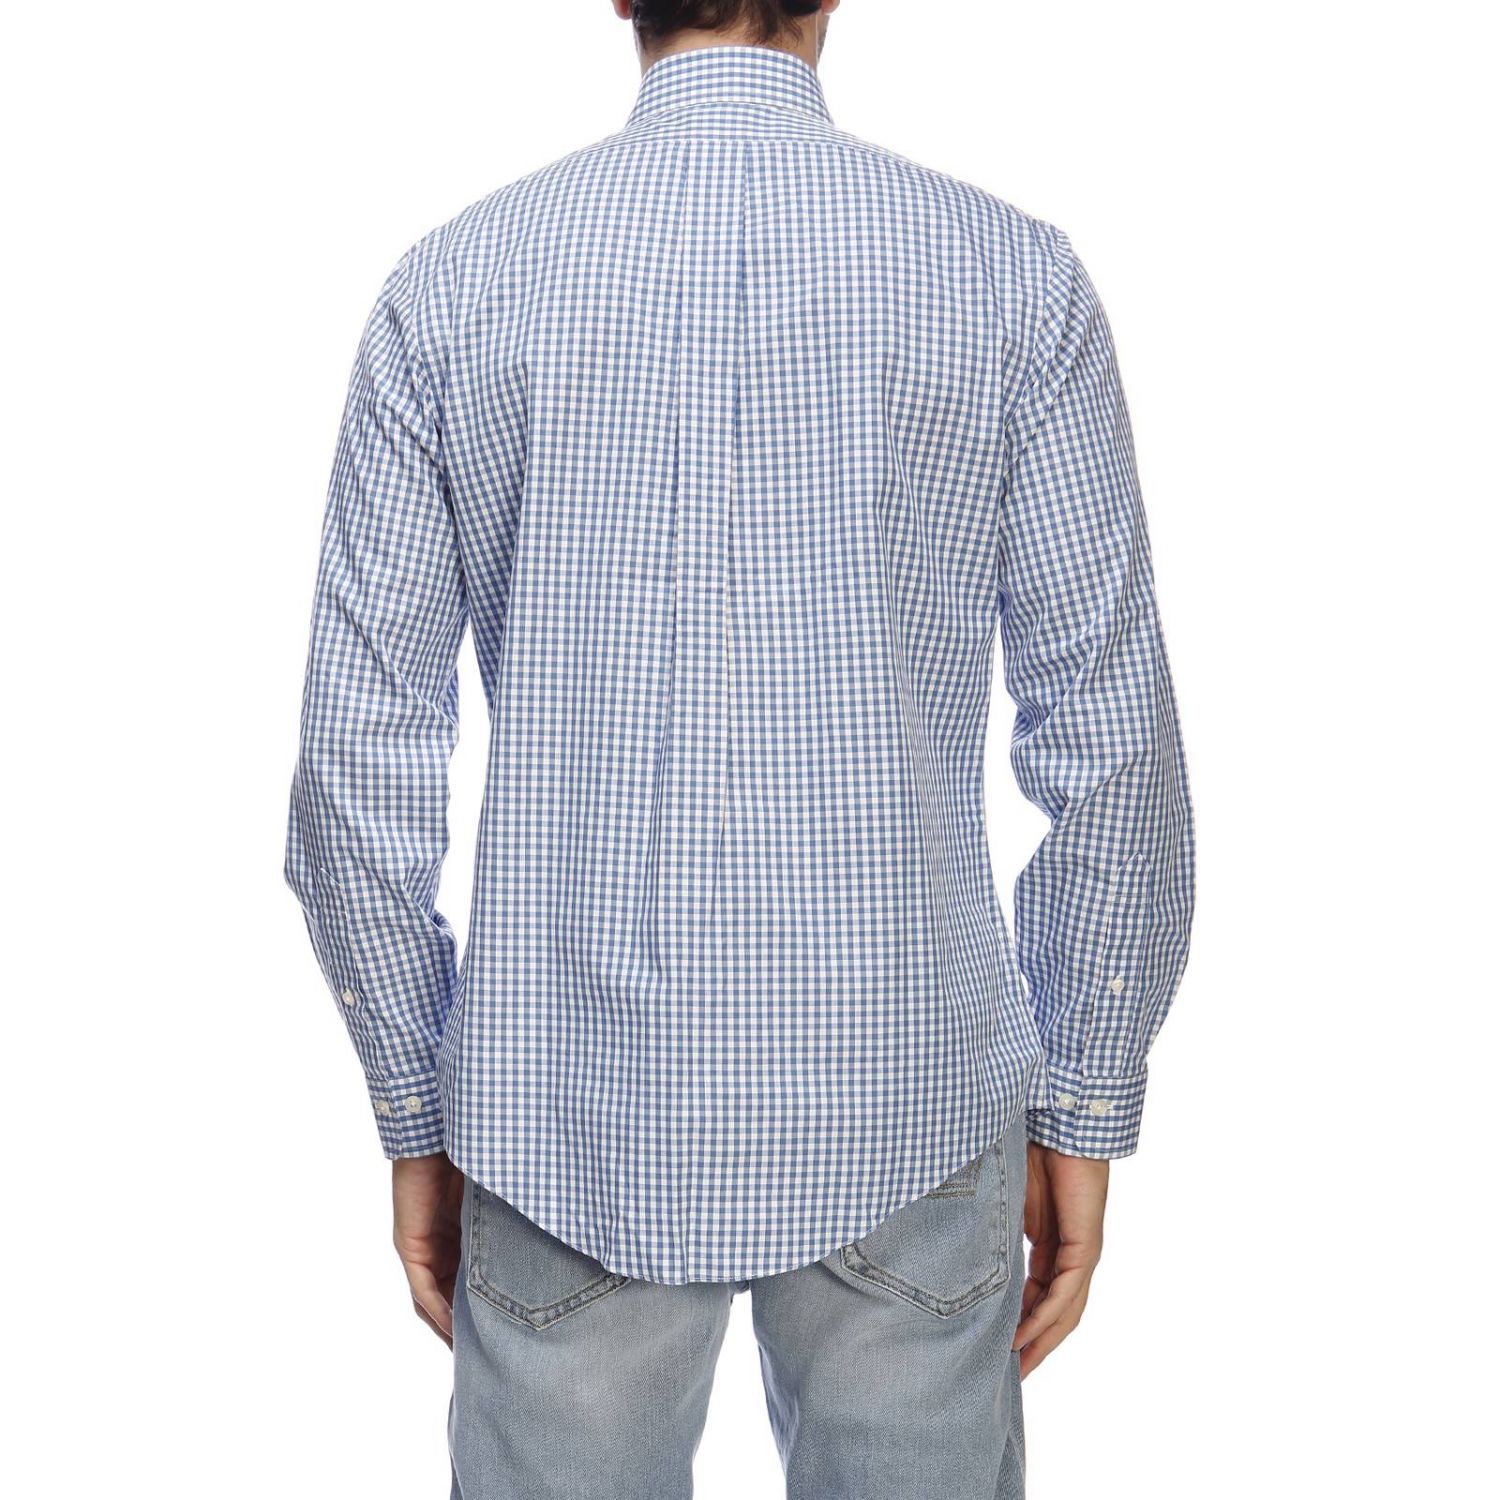 Brooks Brothers Outlet: Shirt men - Gnawed Blue | Shirt Brooks Brothers ...